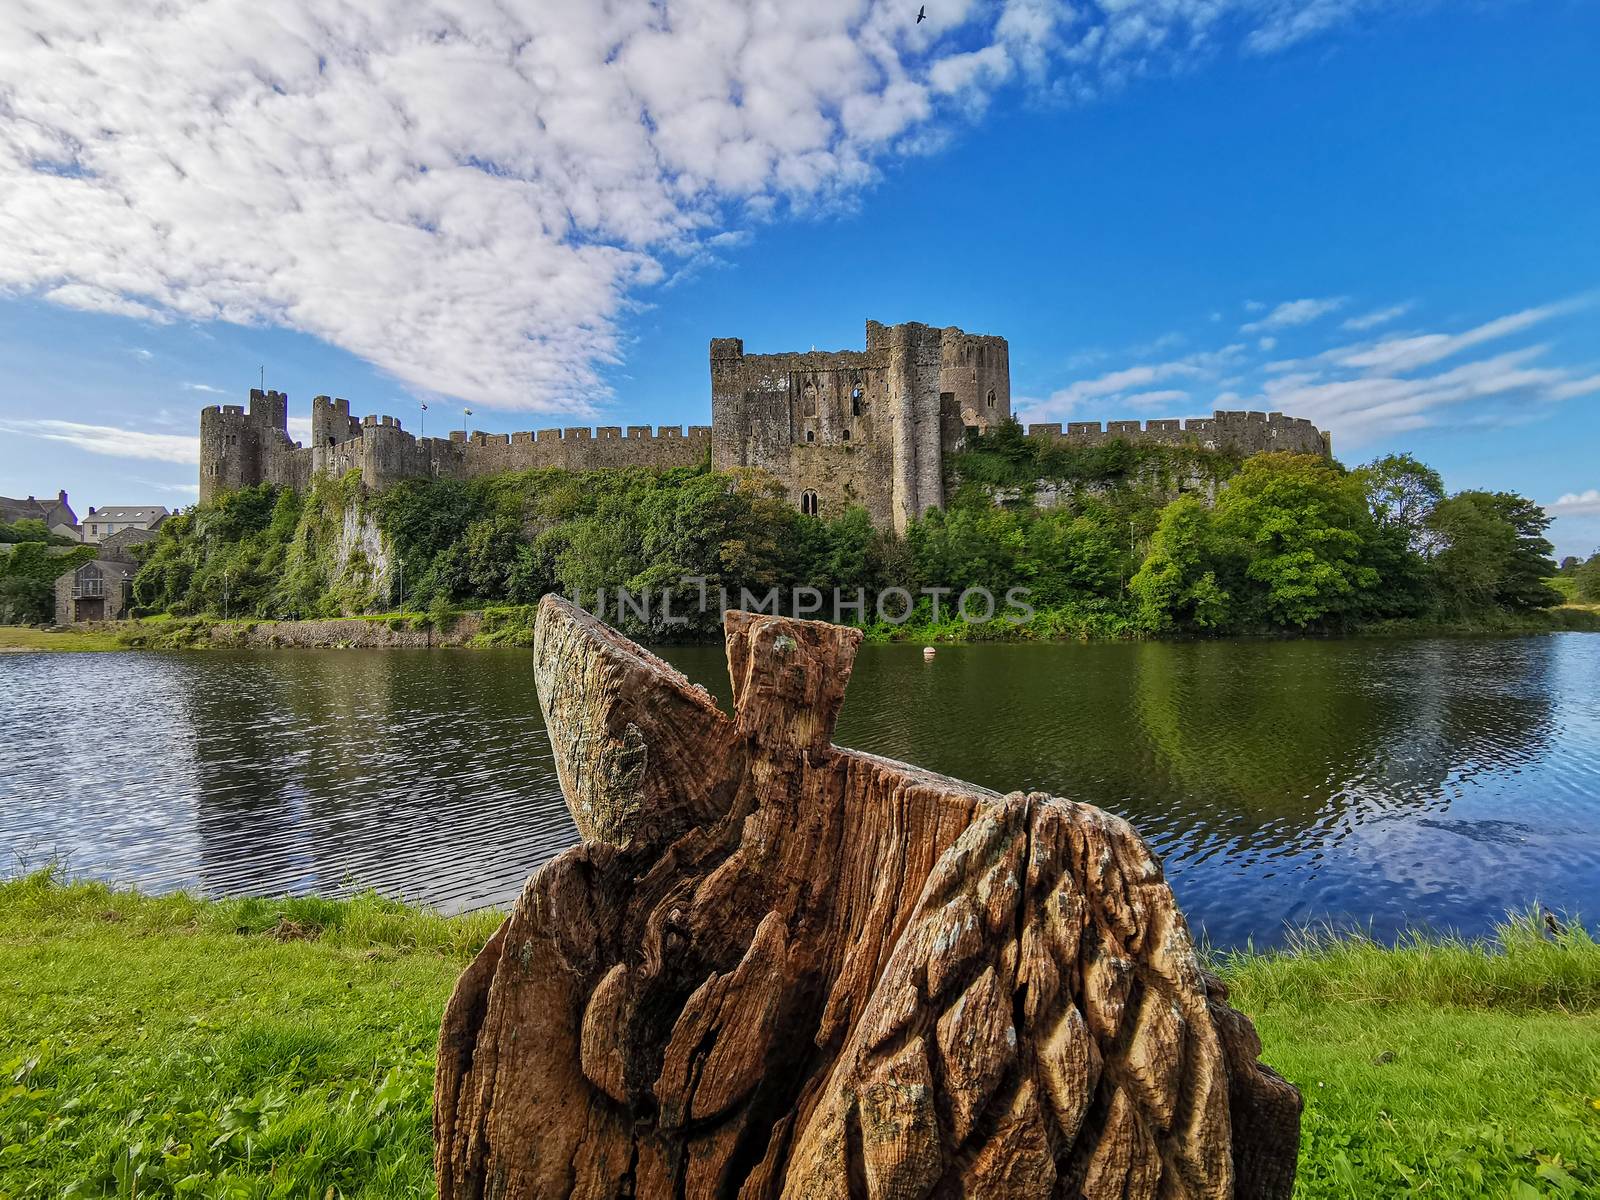 The medieval Pembroke Castle Wales surrounded by a moat and overlooked the market town of Pembroke. This fortress is an historical building and the start of the Tudor Dynasty. Blue skys and a wooden carving.